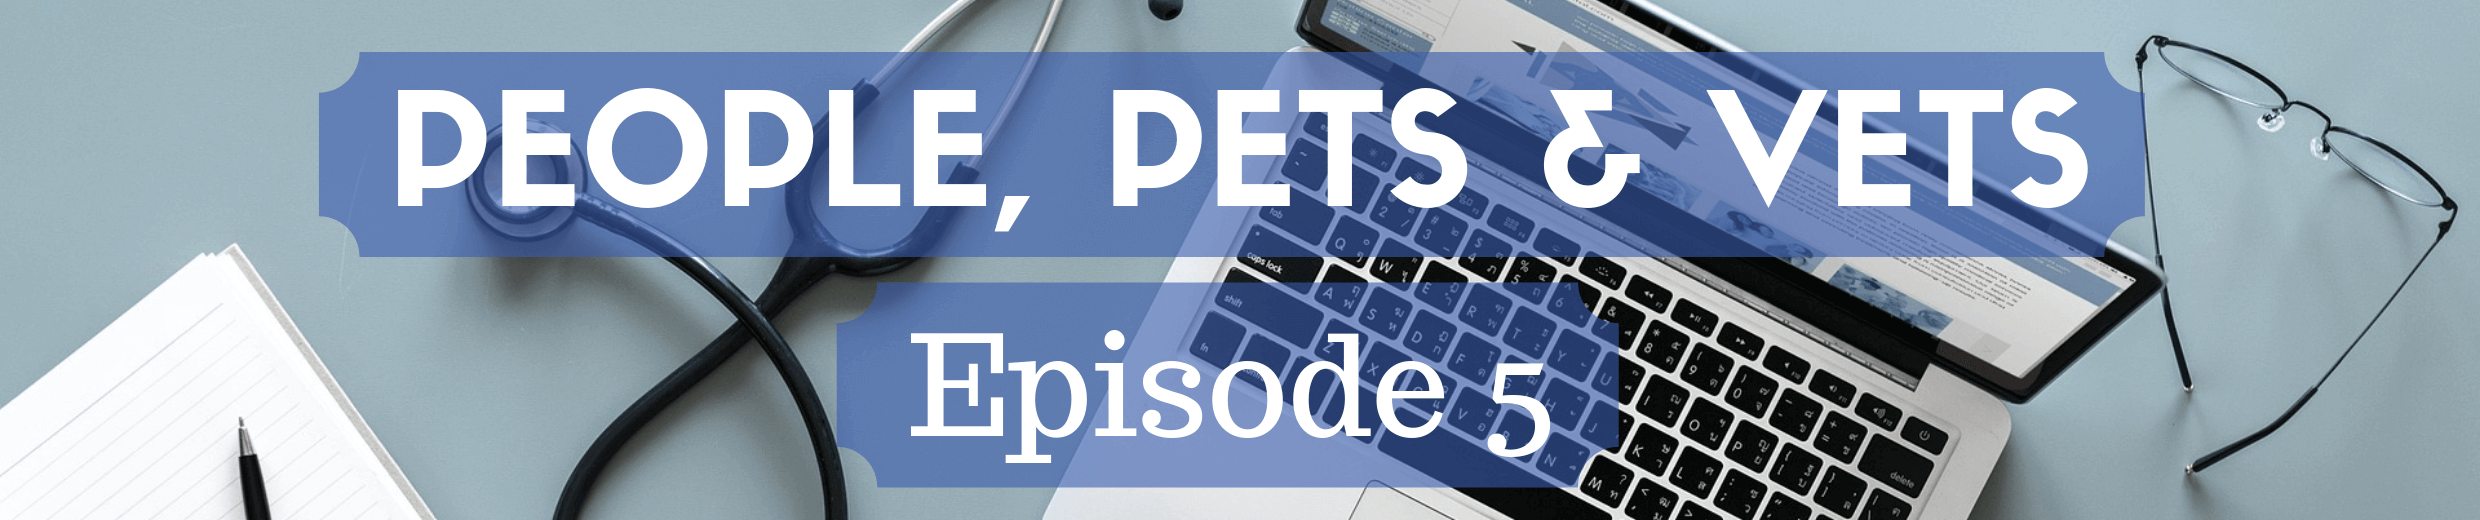 People, Pets and Vets: Episode 5